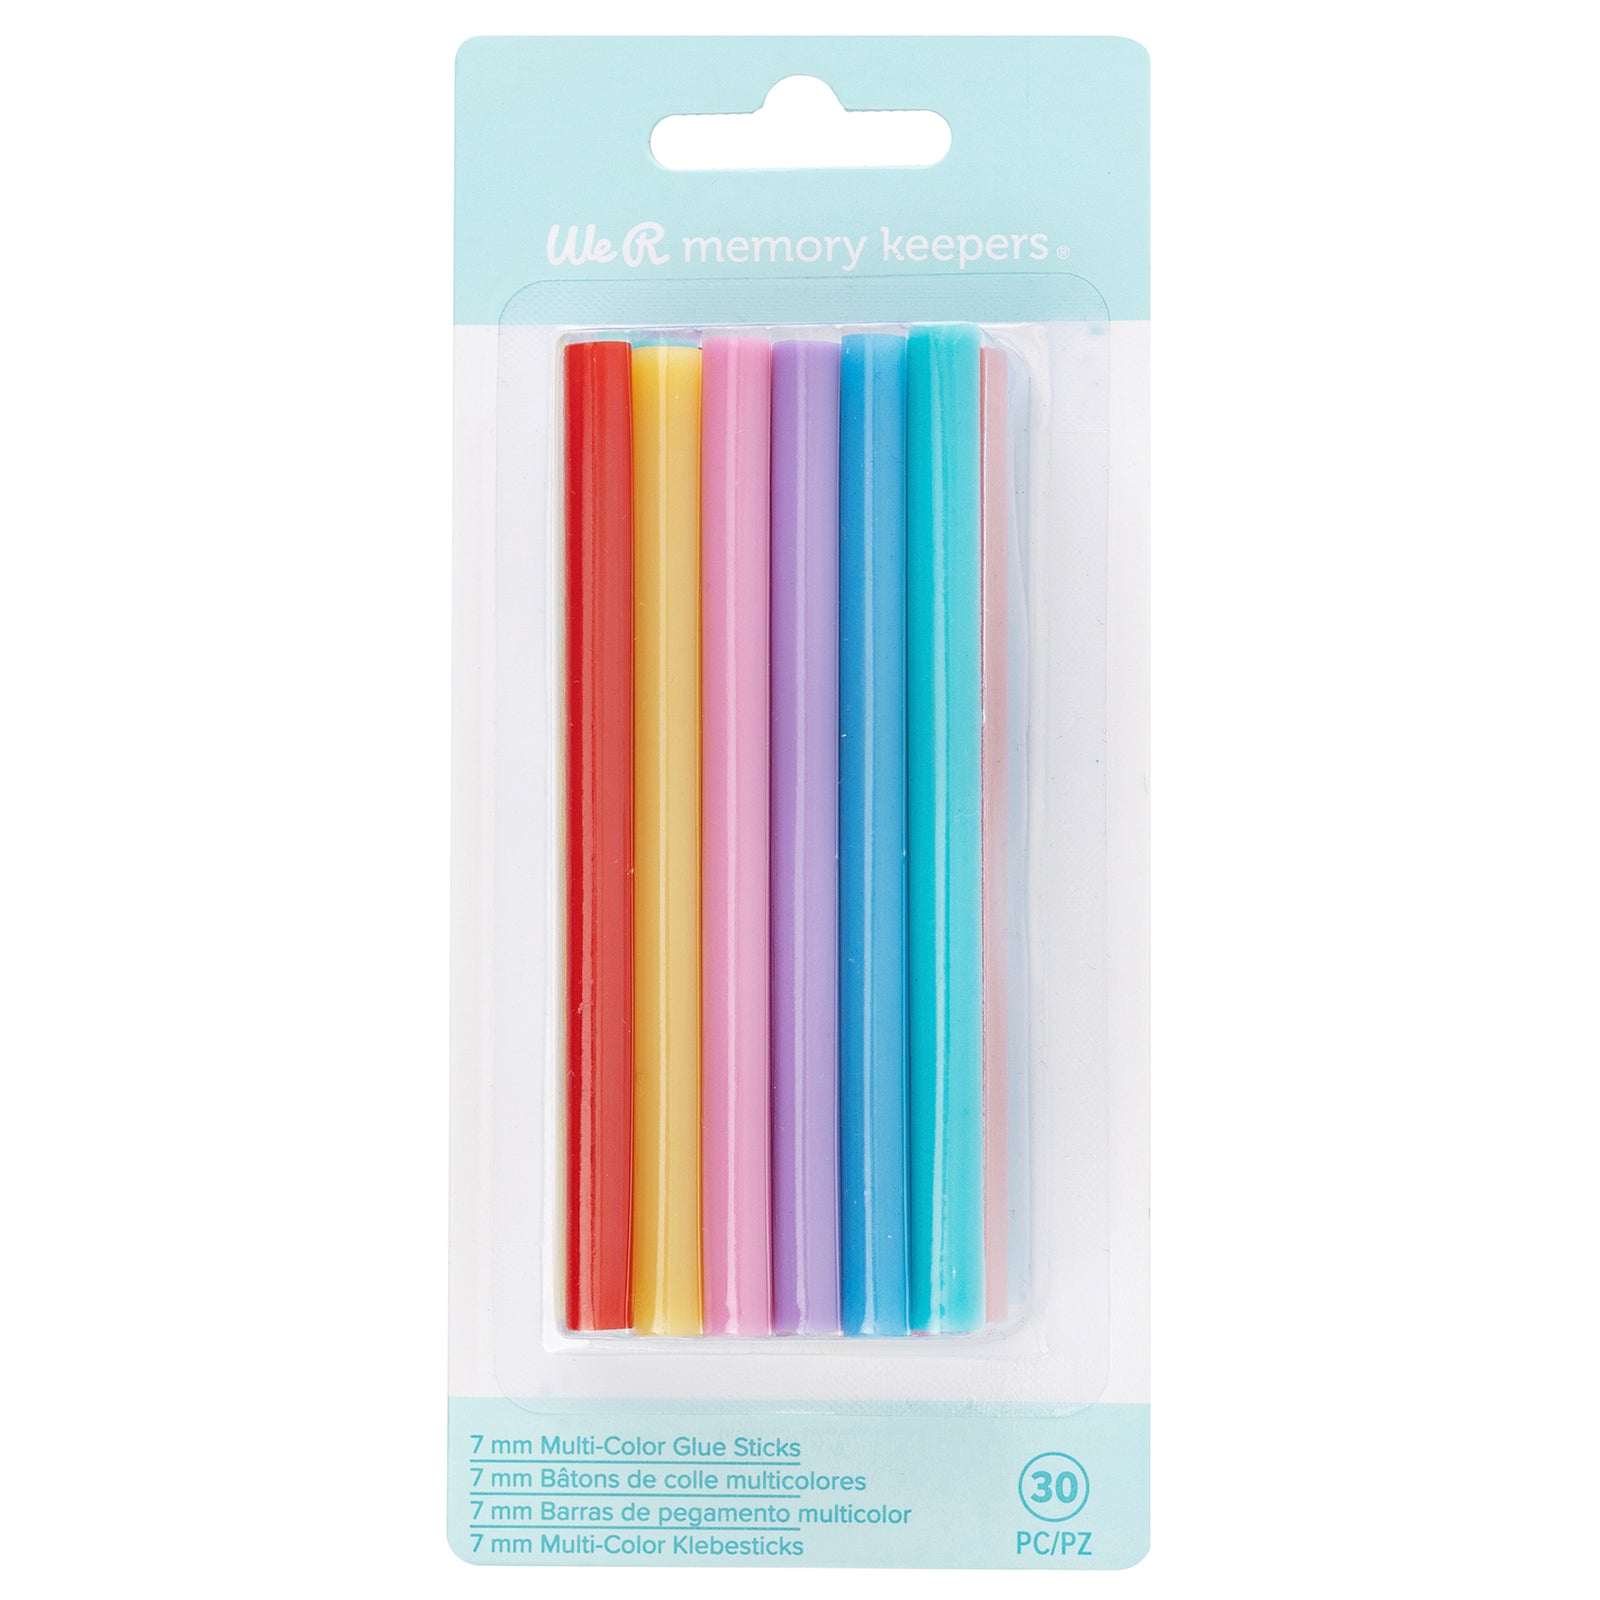 Black and White Creative Flow Hot Glue Sticks by We R Memory Keepers